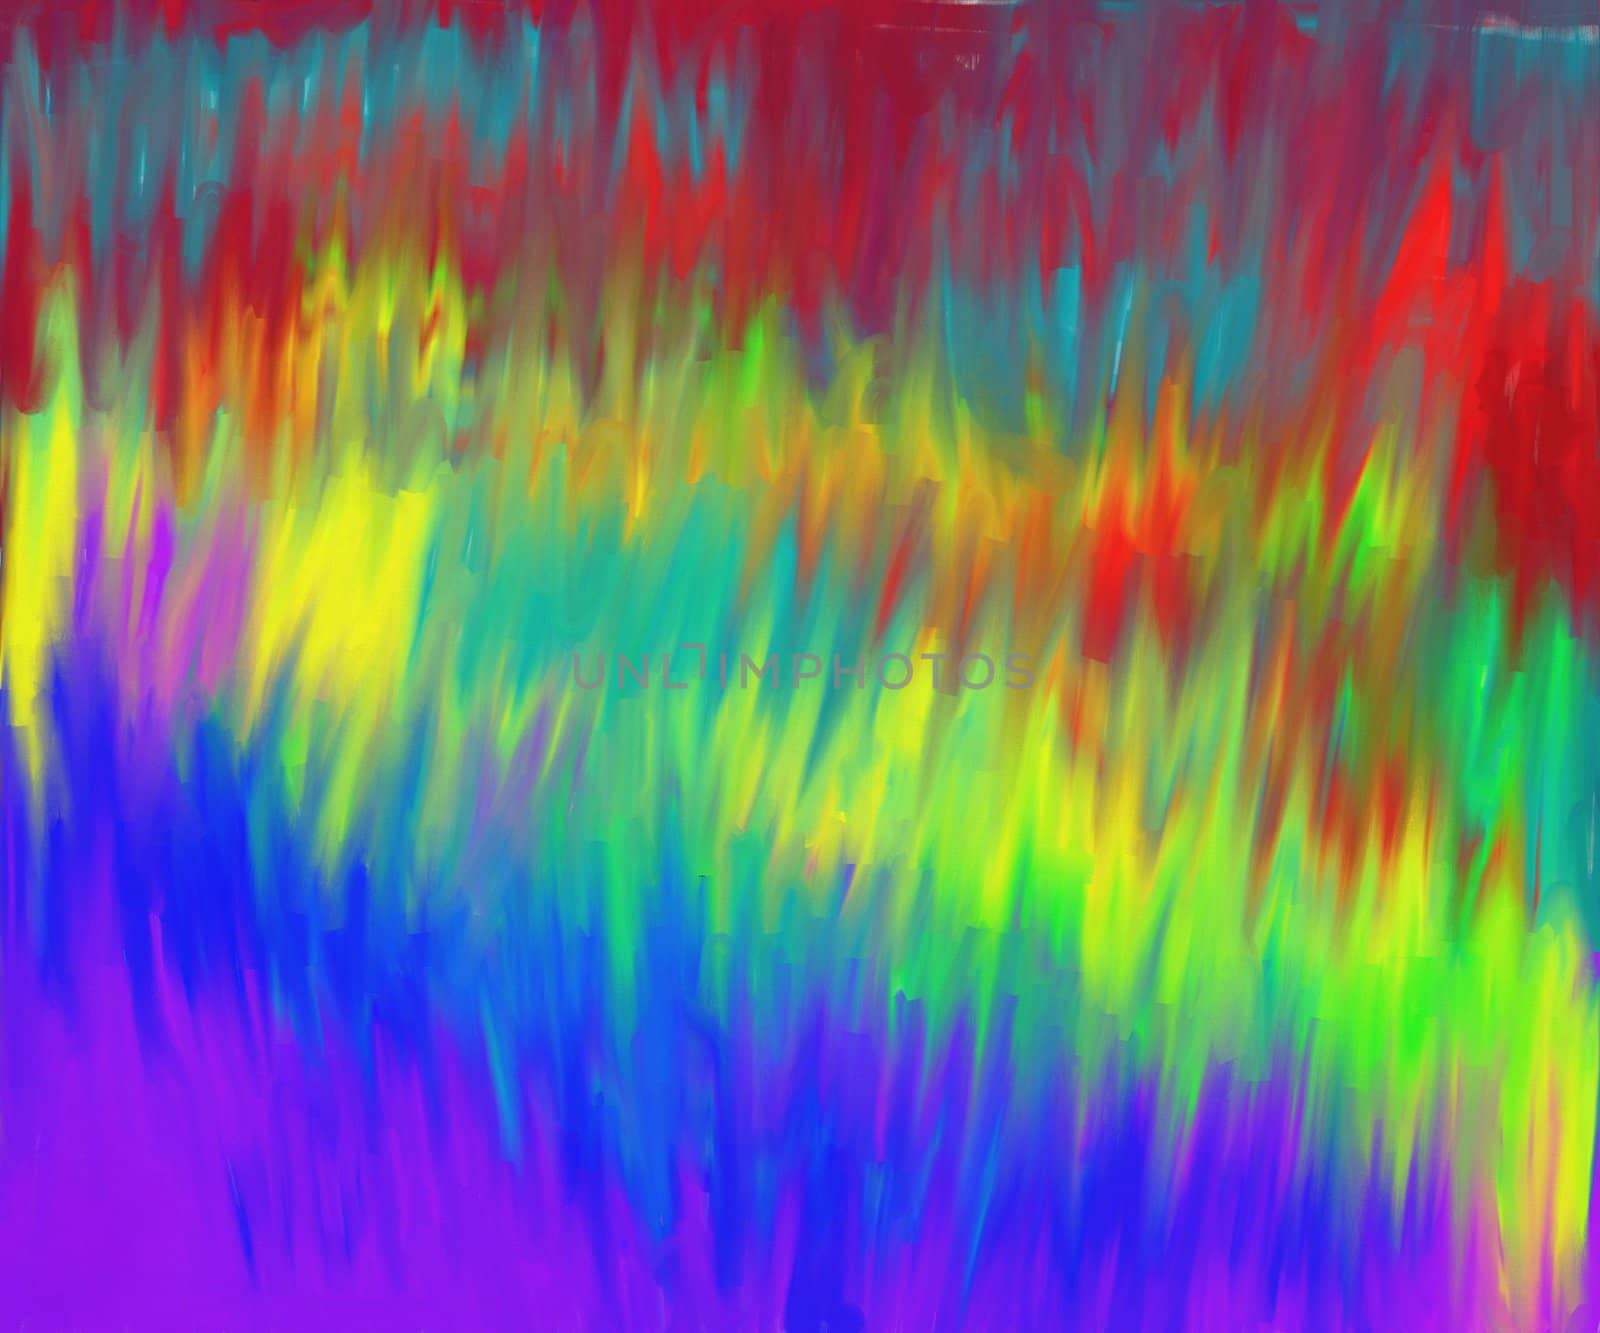 A paint stroke texture with various colors